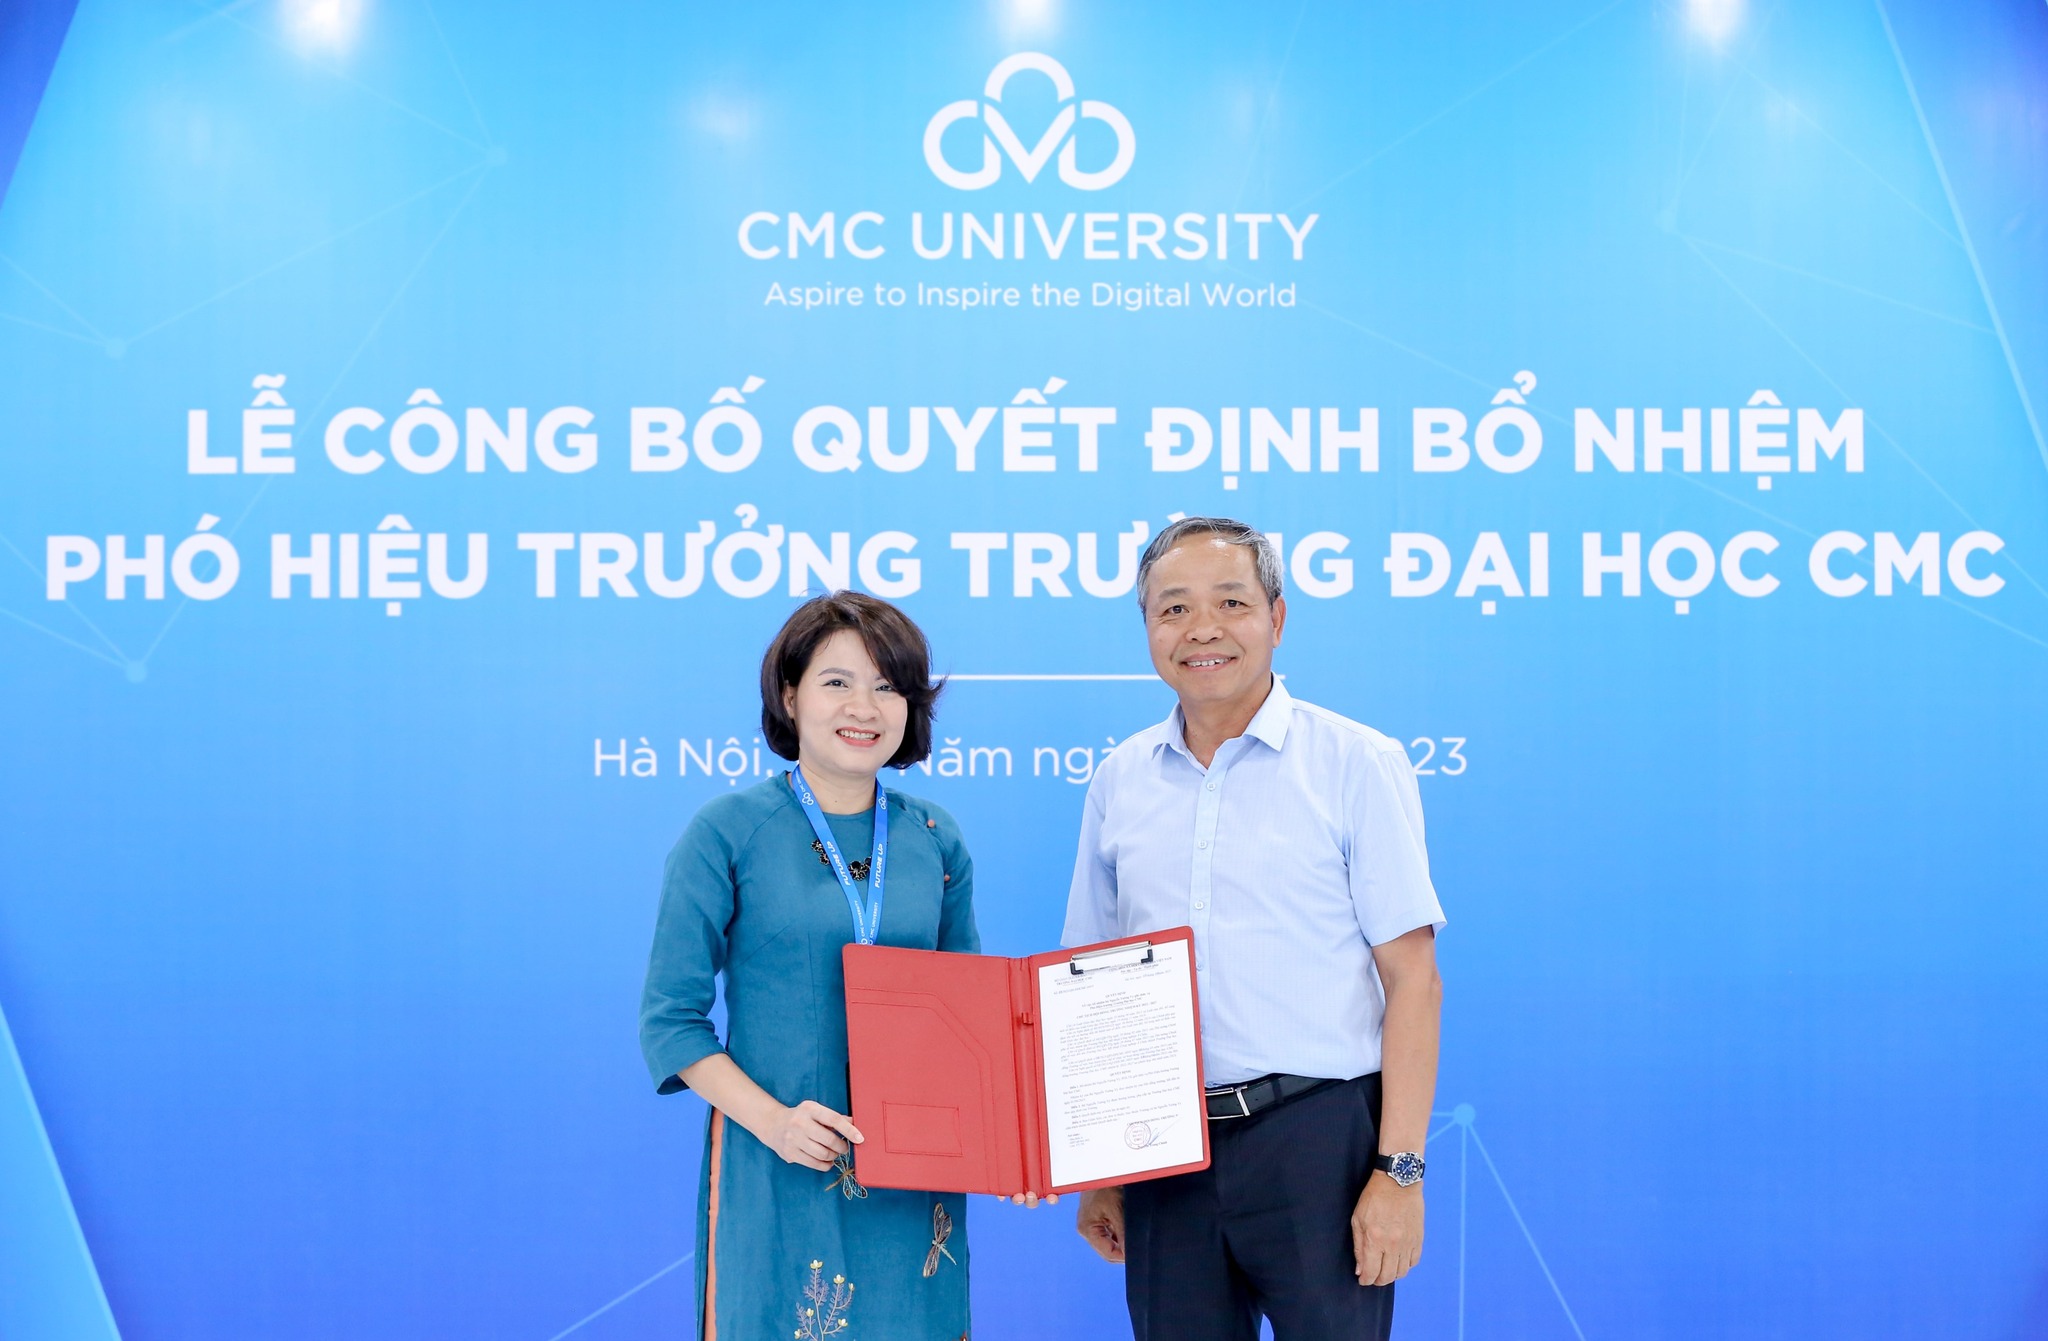 Ceremony held to announce decision on appointing Vice President of CMC University